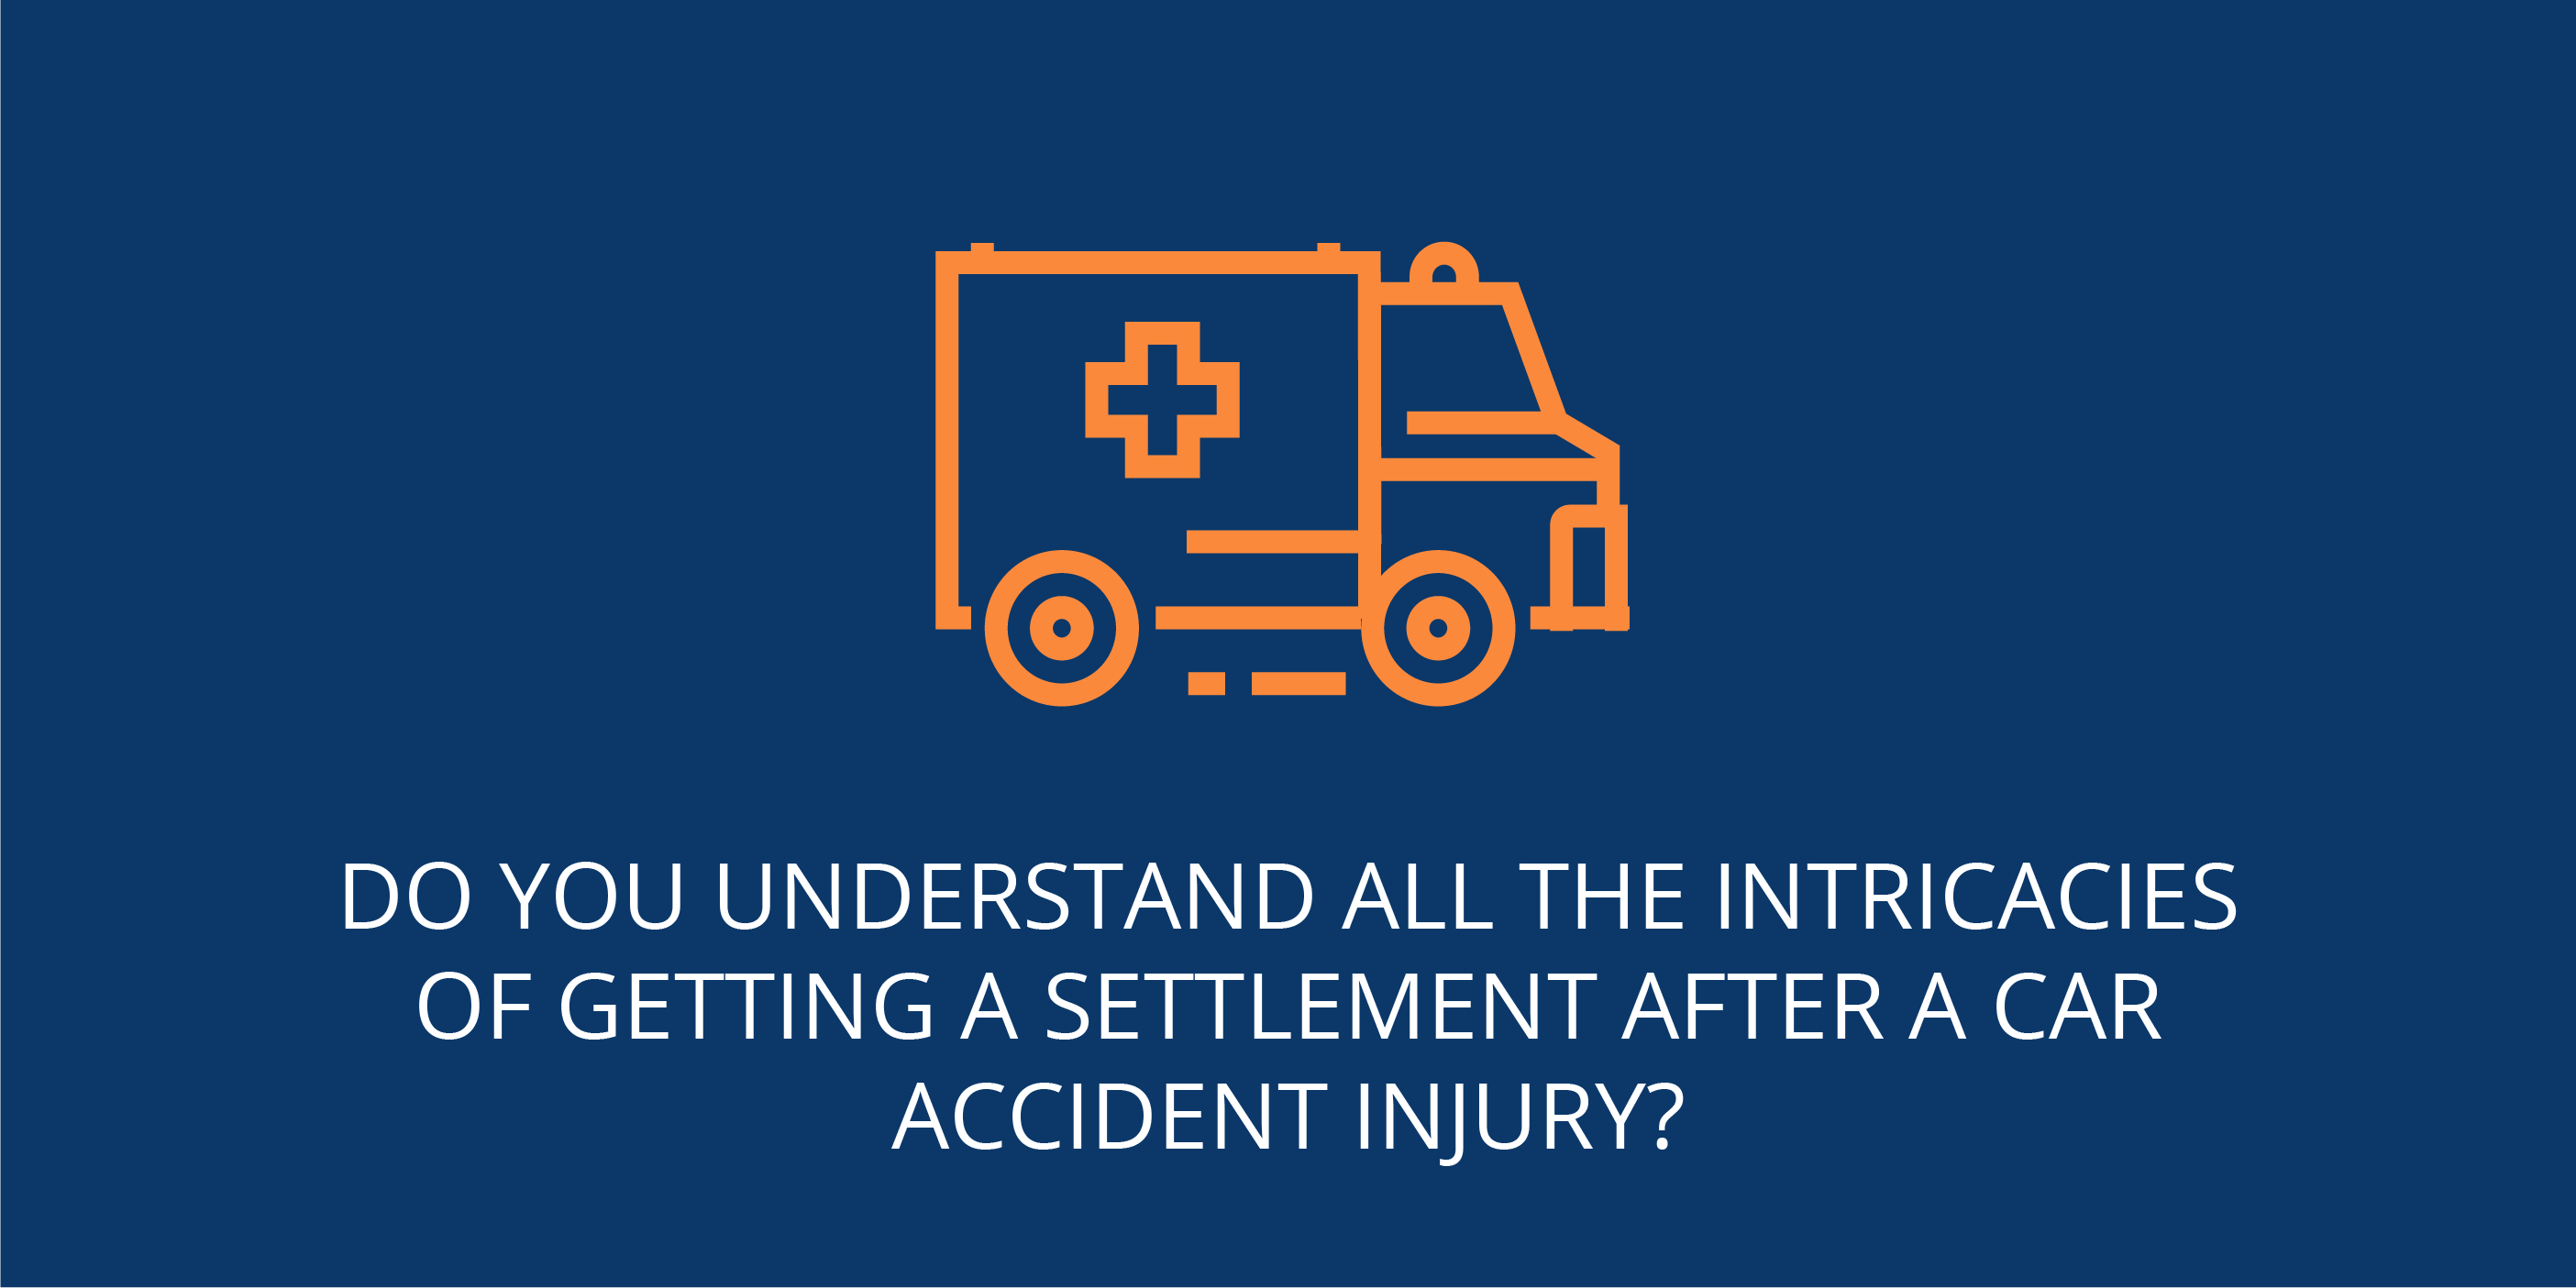 Do you understand all the intricacies of getting a settlement after a car accident injury?